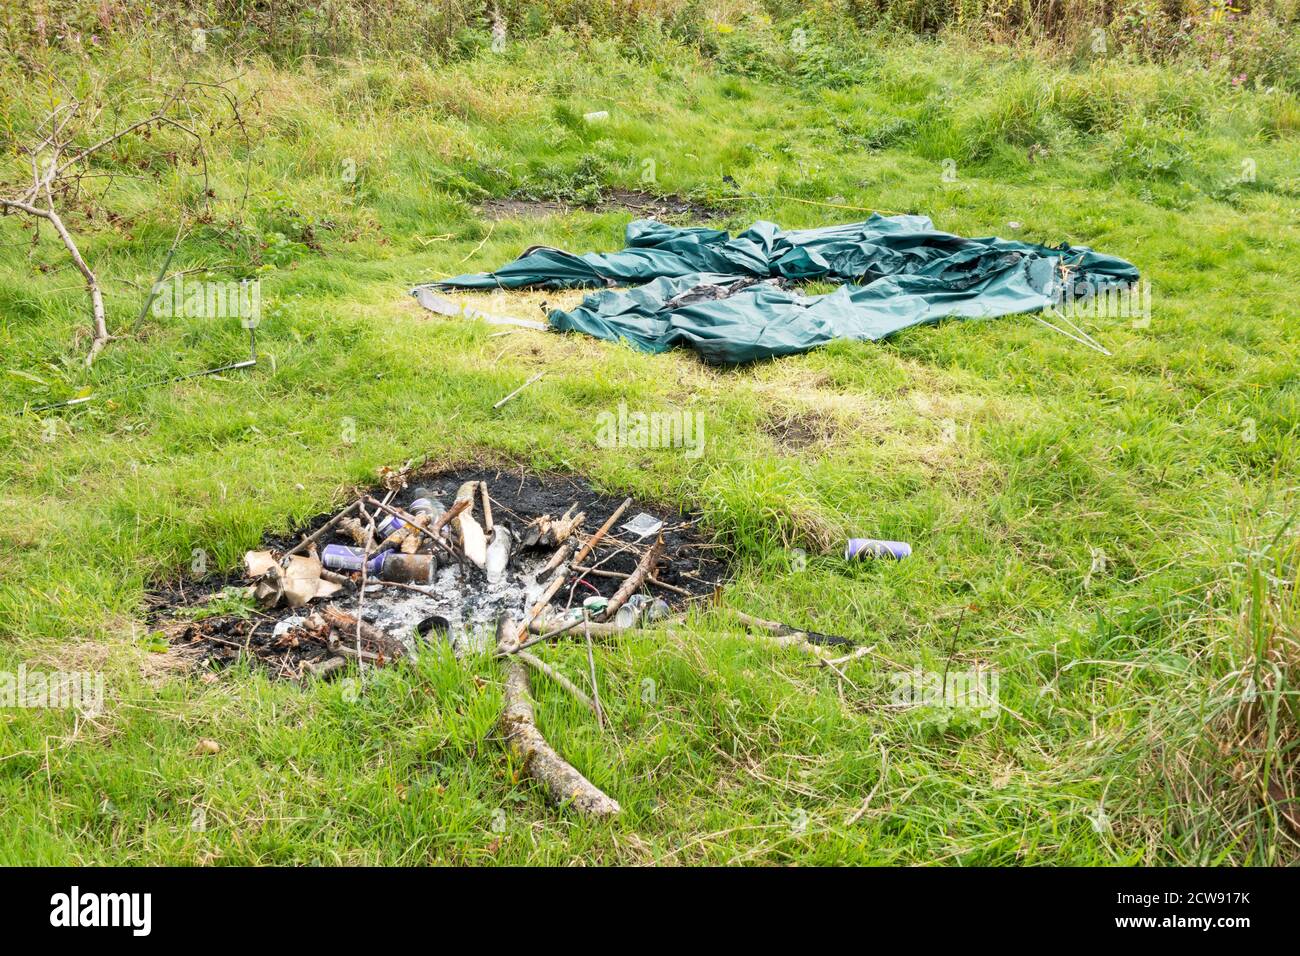 Abandoned tent and camp fire with discarded drinks cans and bottles, illegal camping, north east England, UK Stock Photo